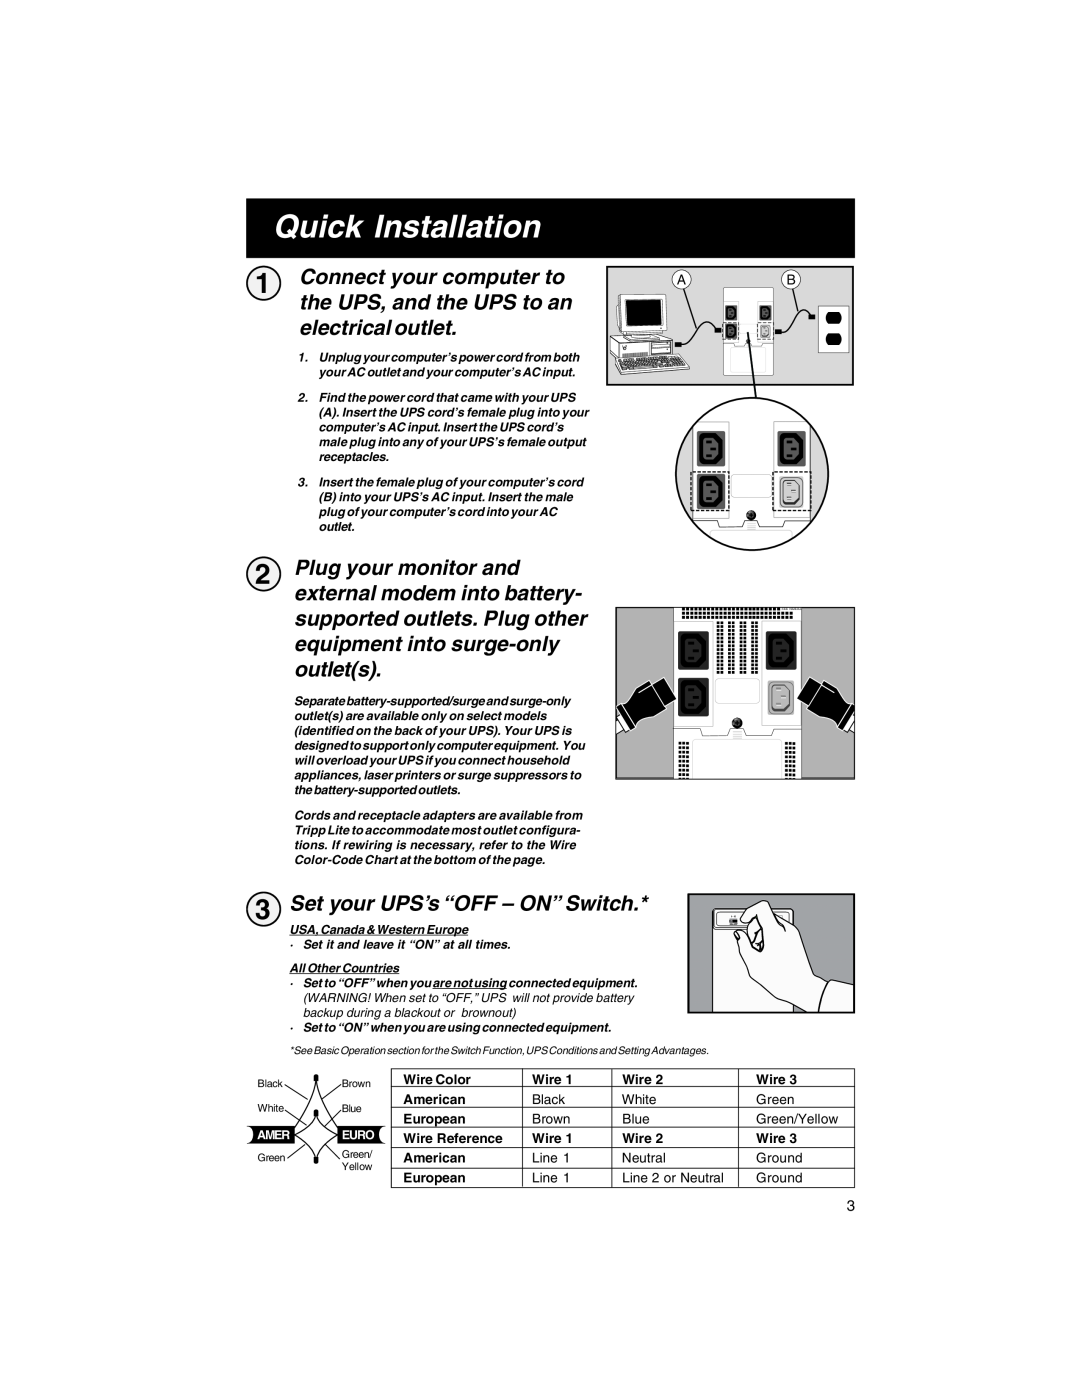 Tripp Lite OMNIPRO owner manual Quick Installation, Set your UPS’s “OFF - ON” Switch 